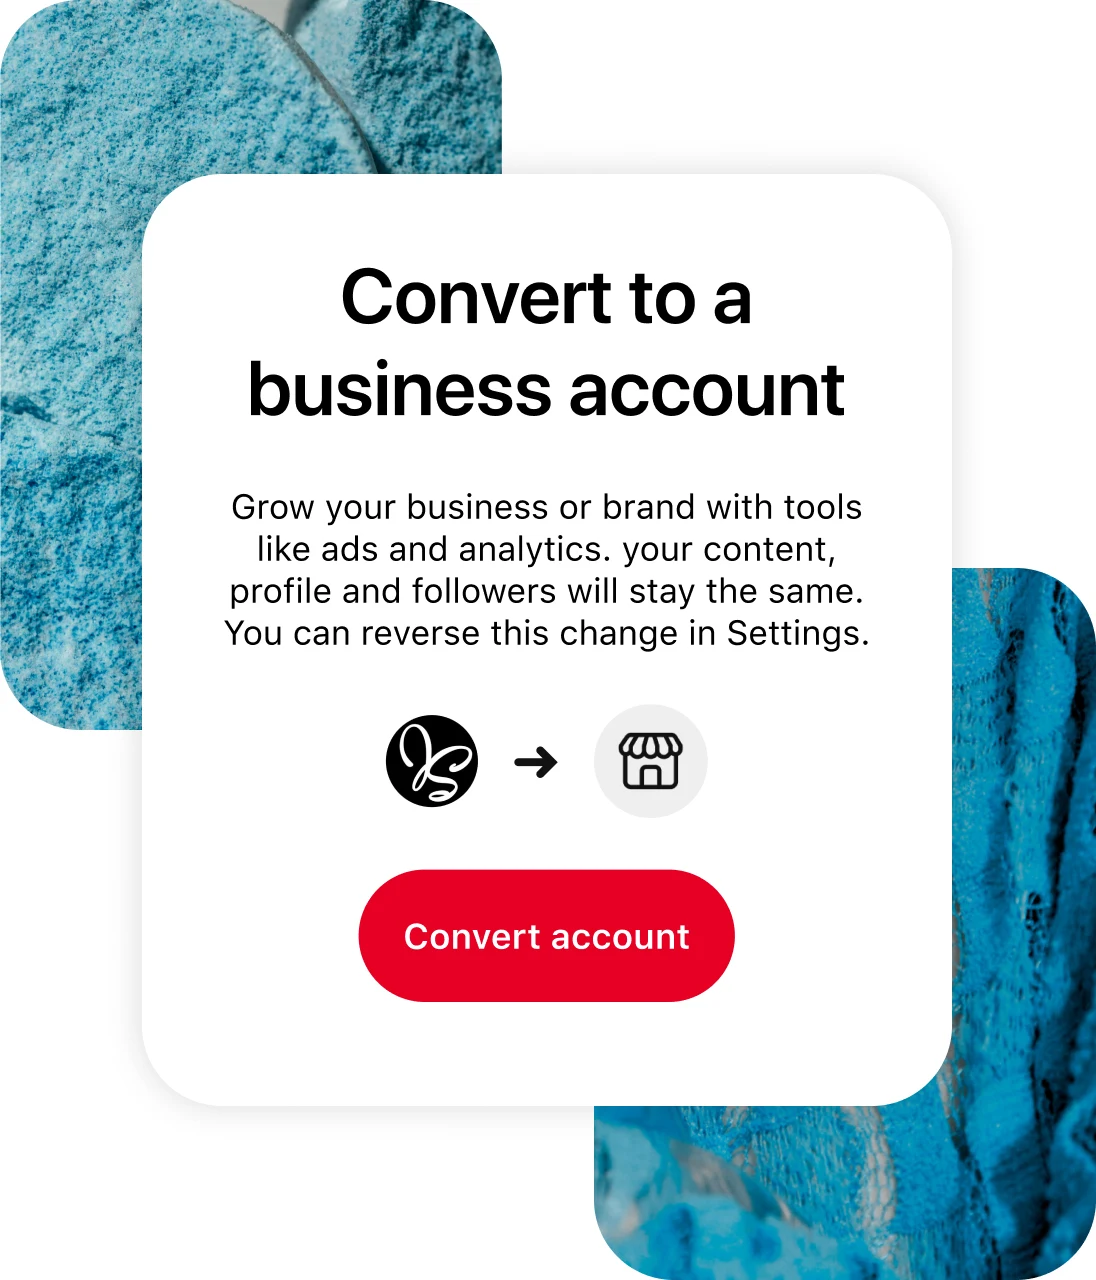 Pinterest app screen showing how to convert to a business account